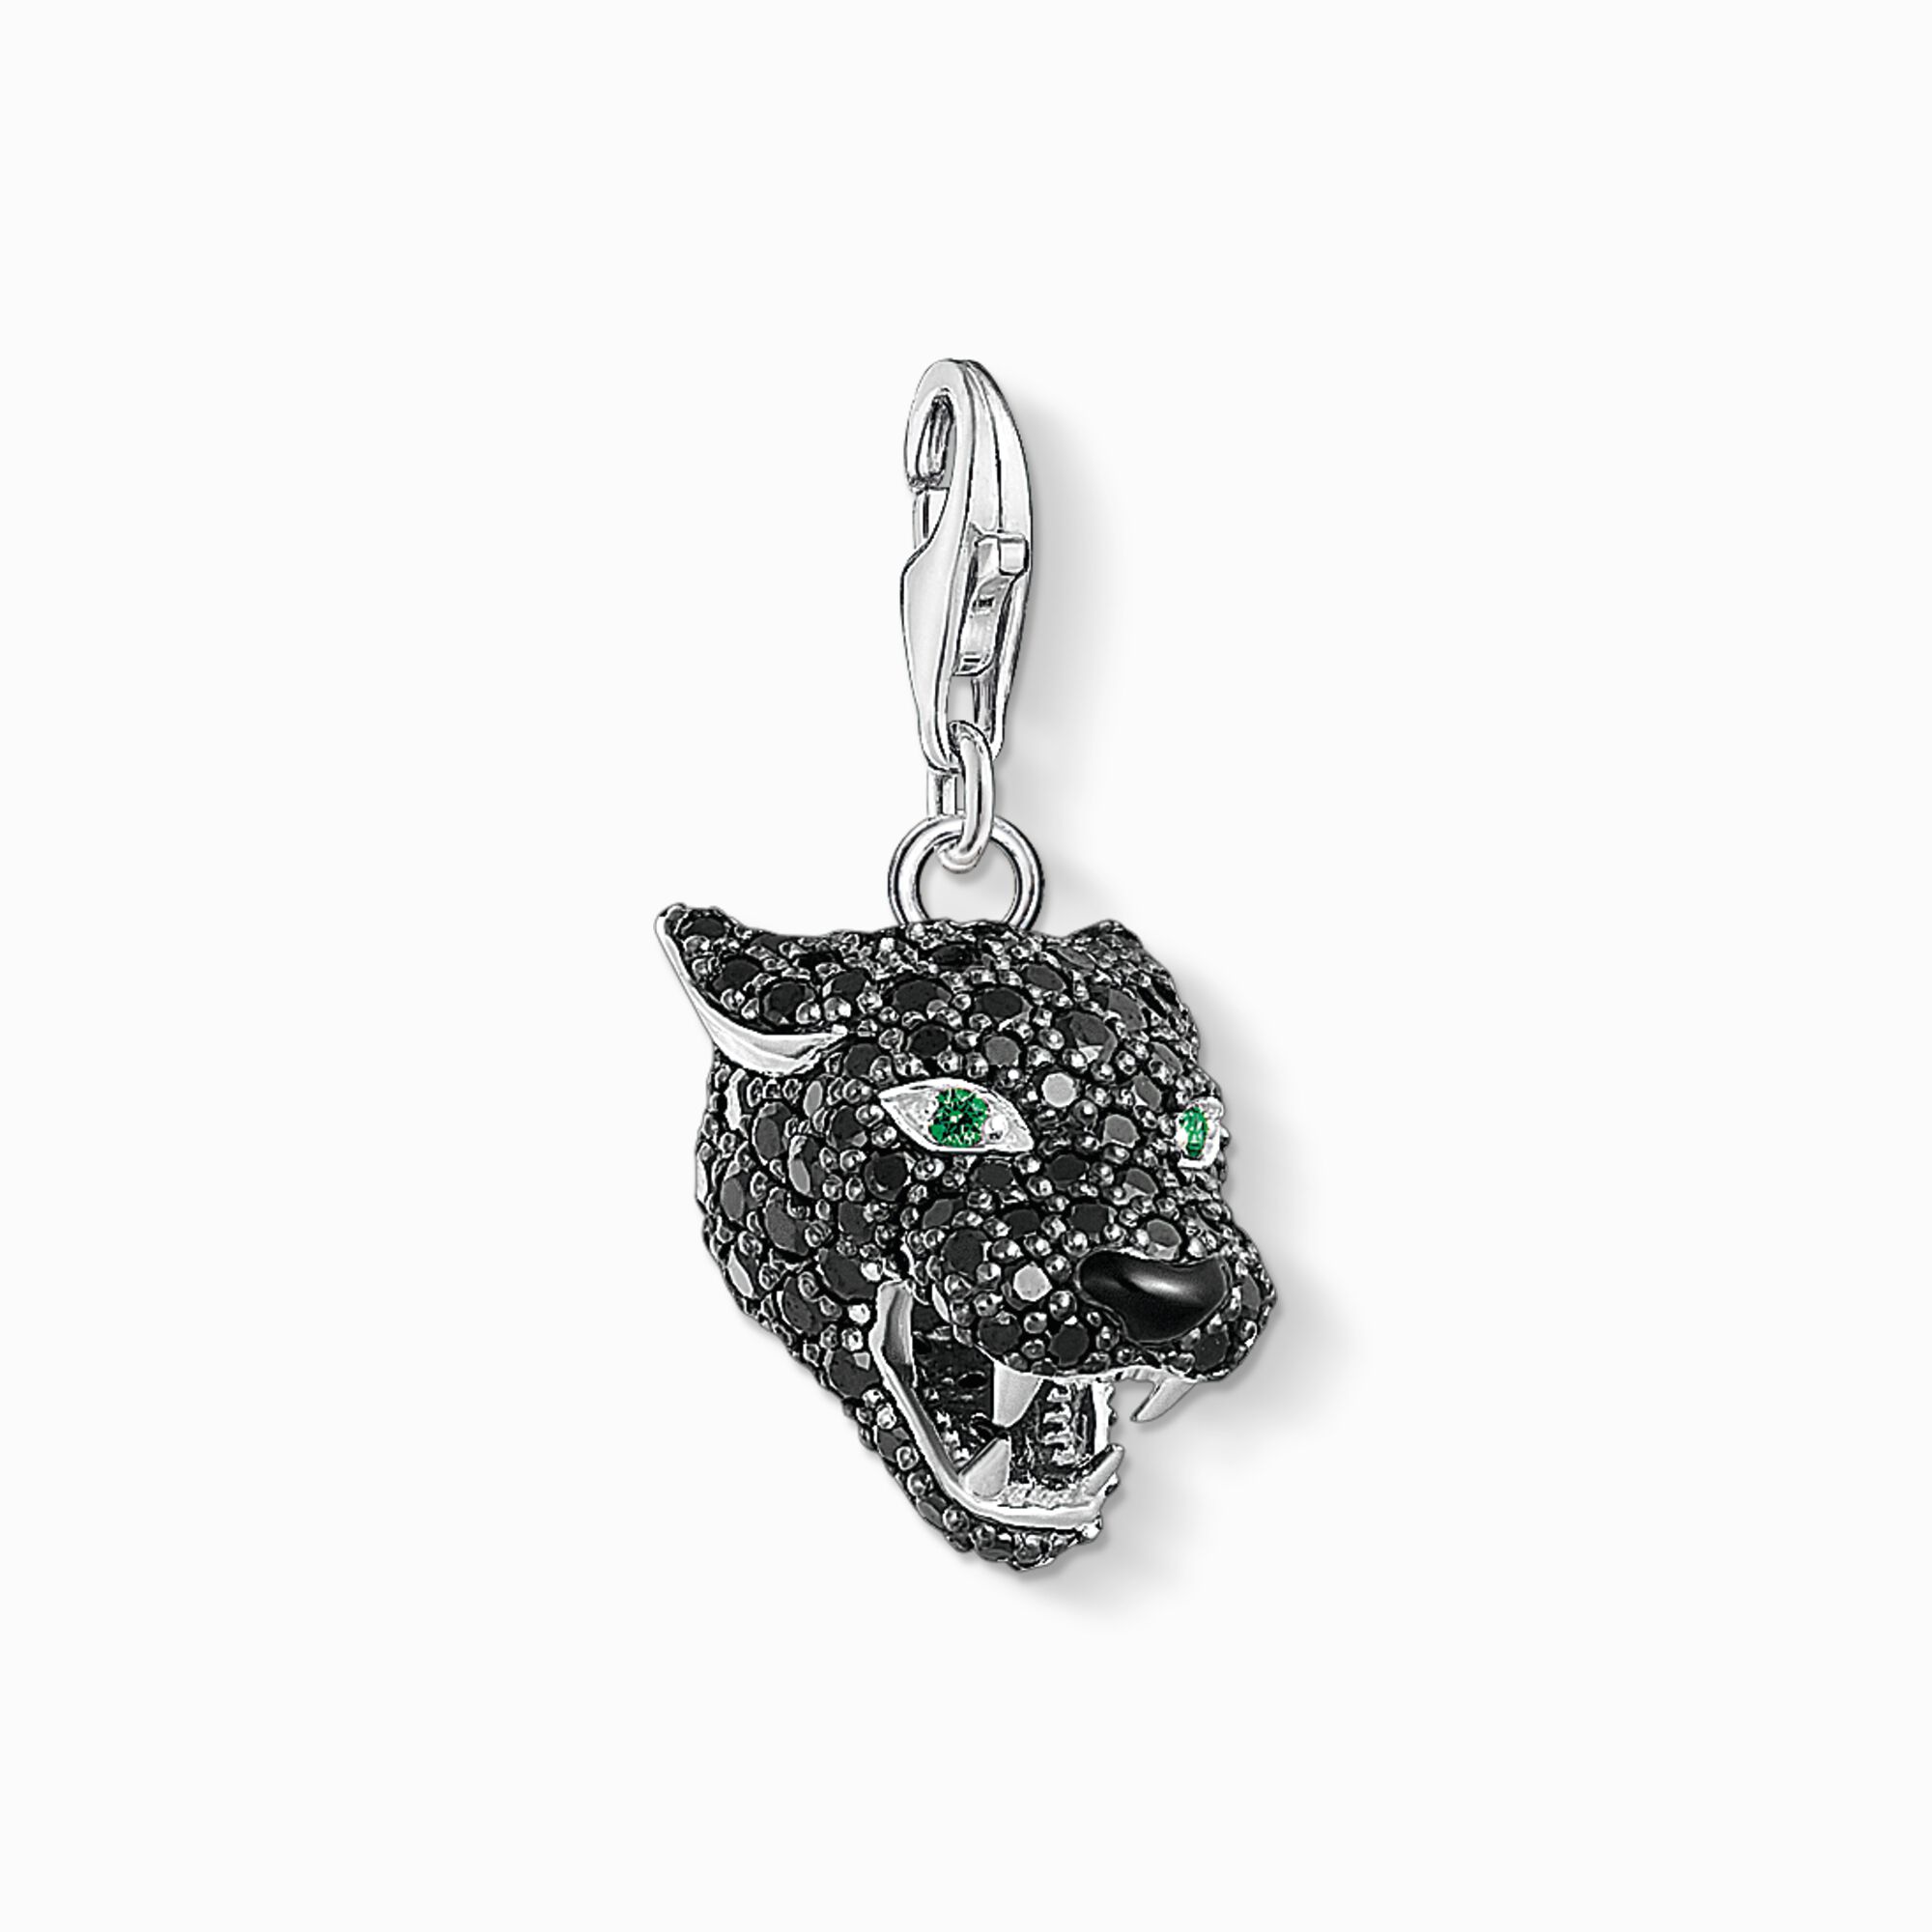 Charm pendant Black Cat from the Charm Club collection in the THOMAS SABO online store